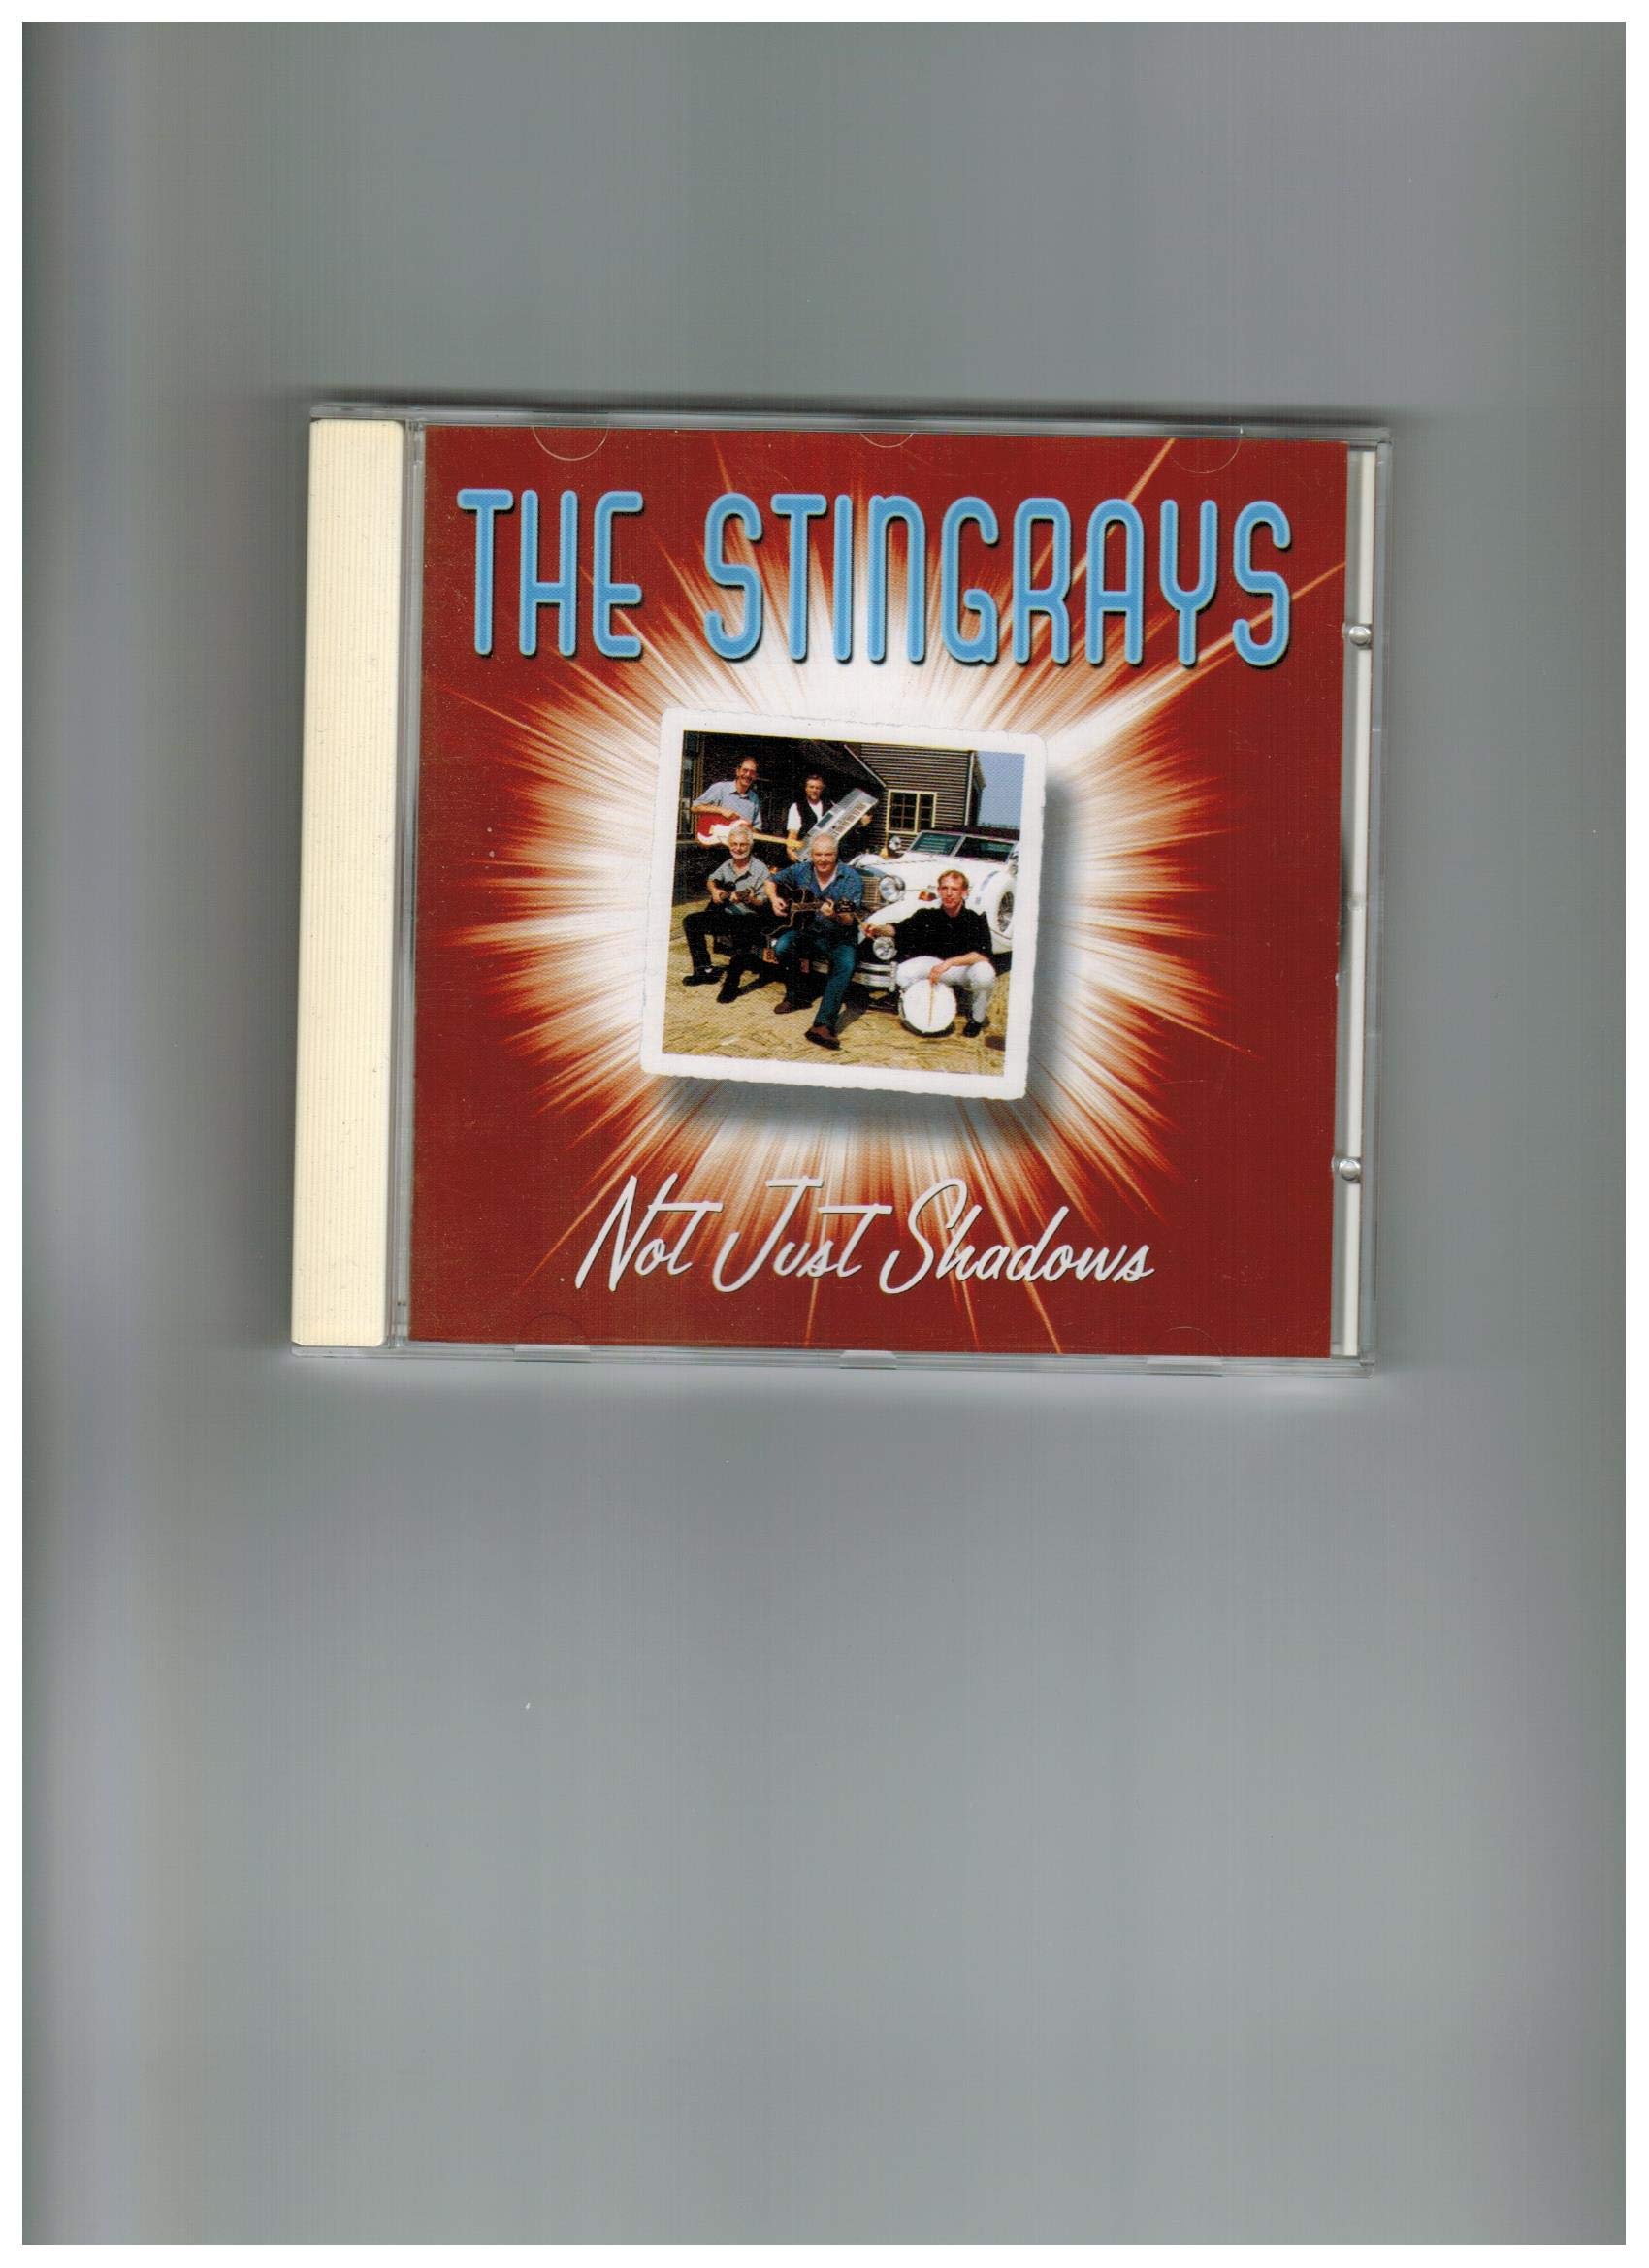 The Stingrays - Not Just Like Shadows